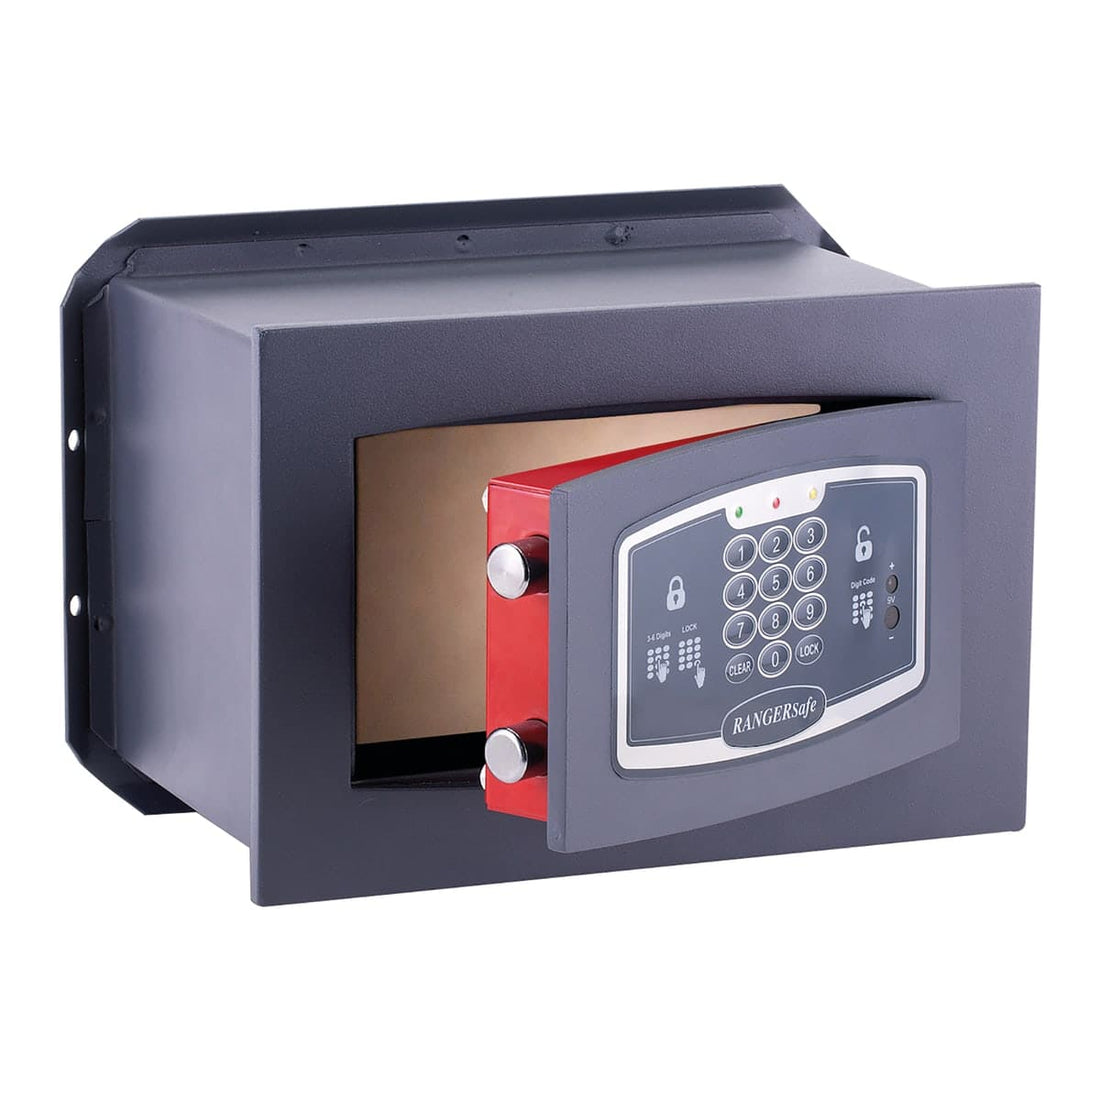 ELECTRONIC WALL SAFE RSE-3 36X20X23 CM - best price from Maltashopper.com BR410004144